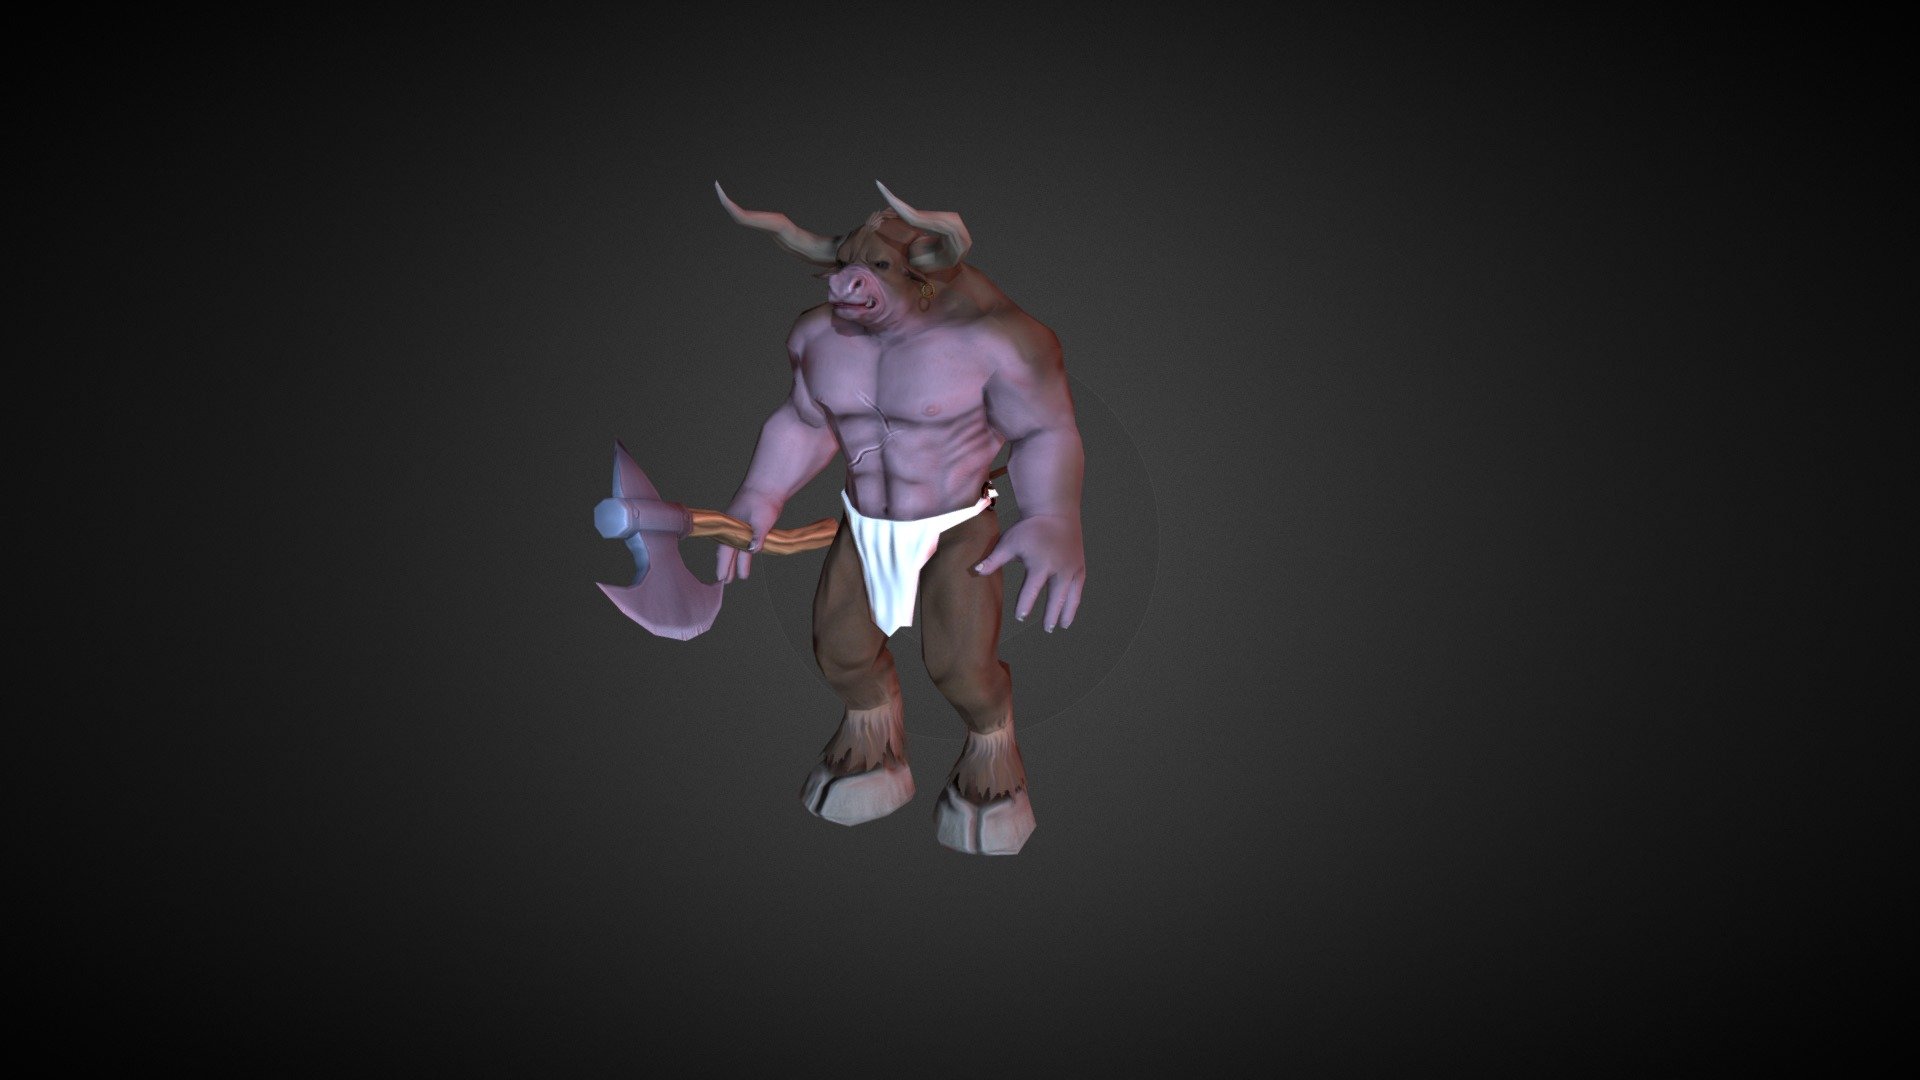 Minotaur cartoon style.
The file contains: 3d file .fbx (embed media ) of minotaur (3690 tris) + axe (468 tris).
The model is skinned, the axe has been linked to the hand bone 3d model